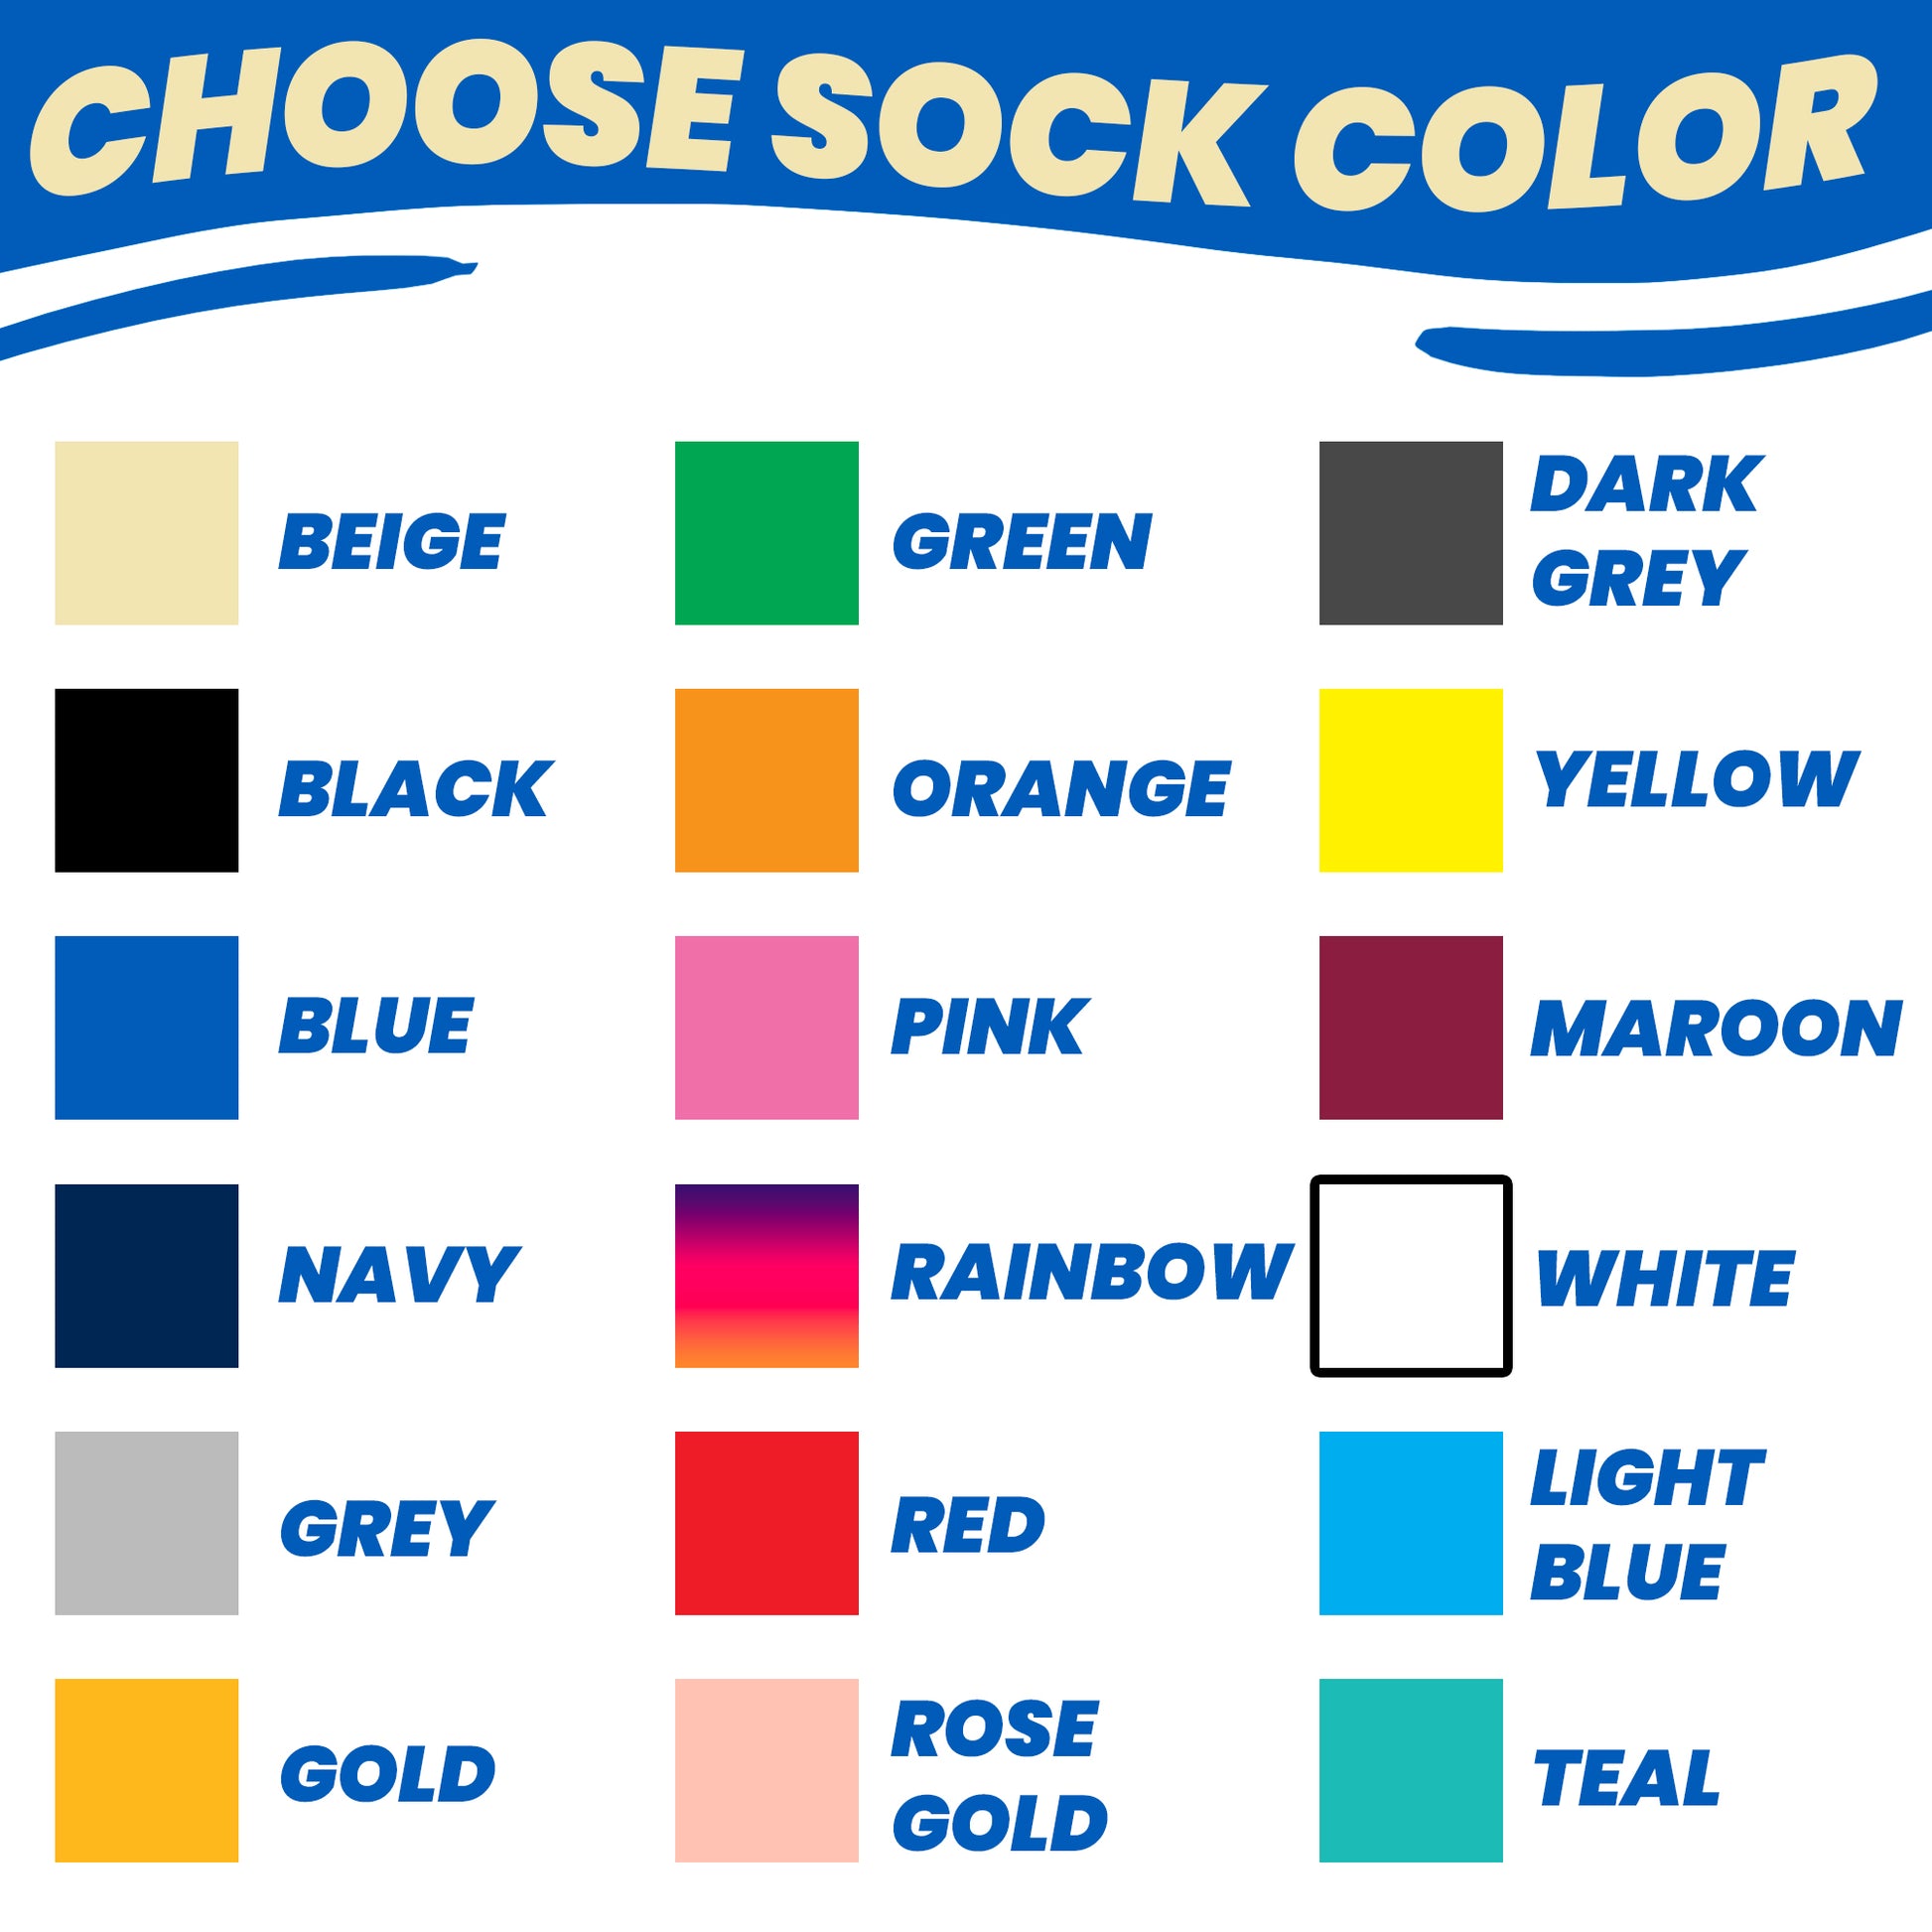 swatches for the sock's background color